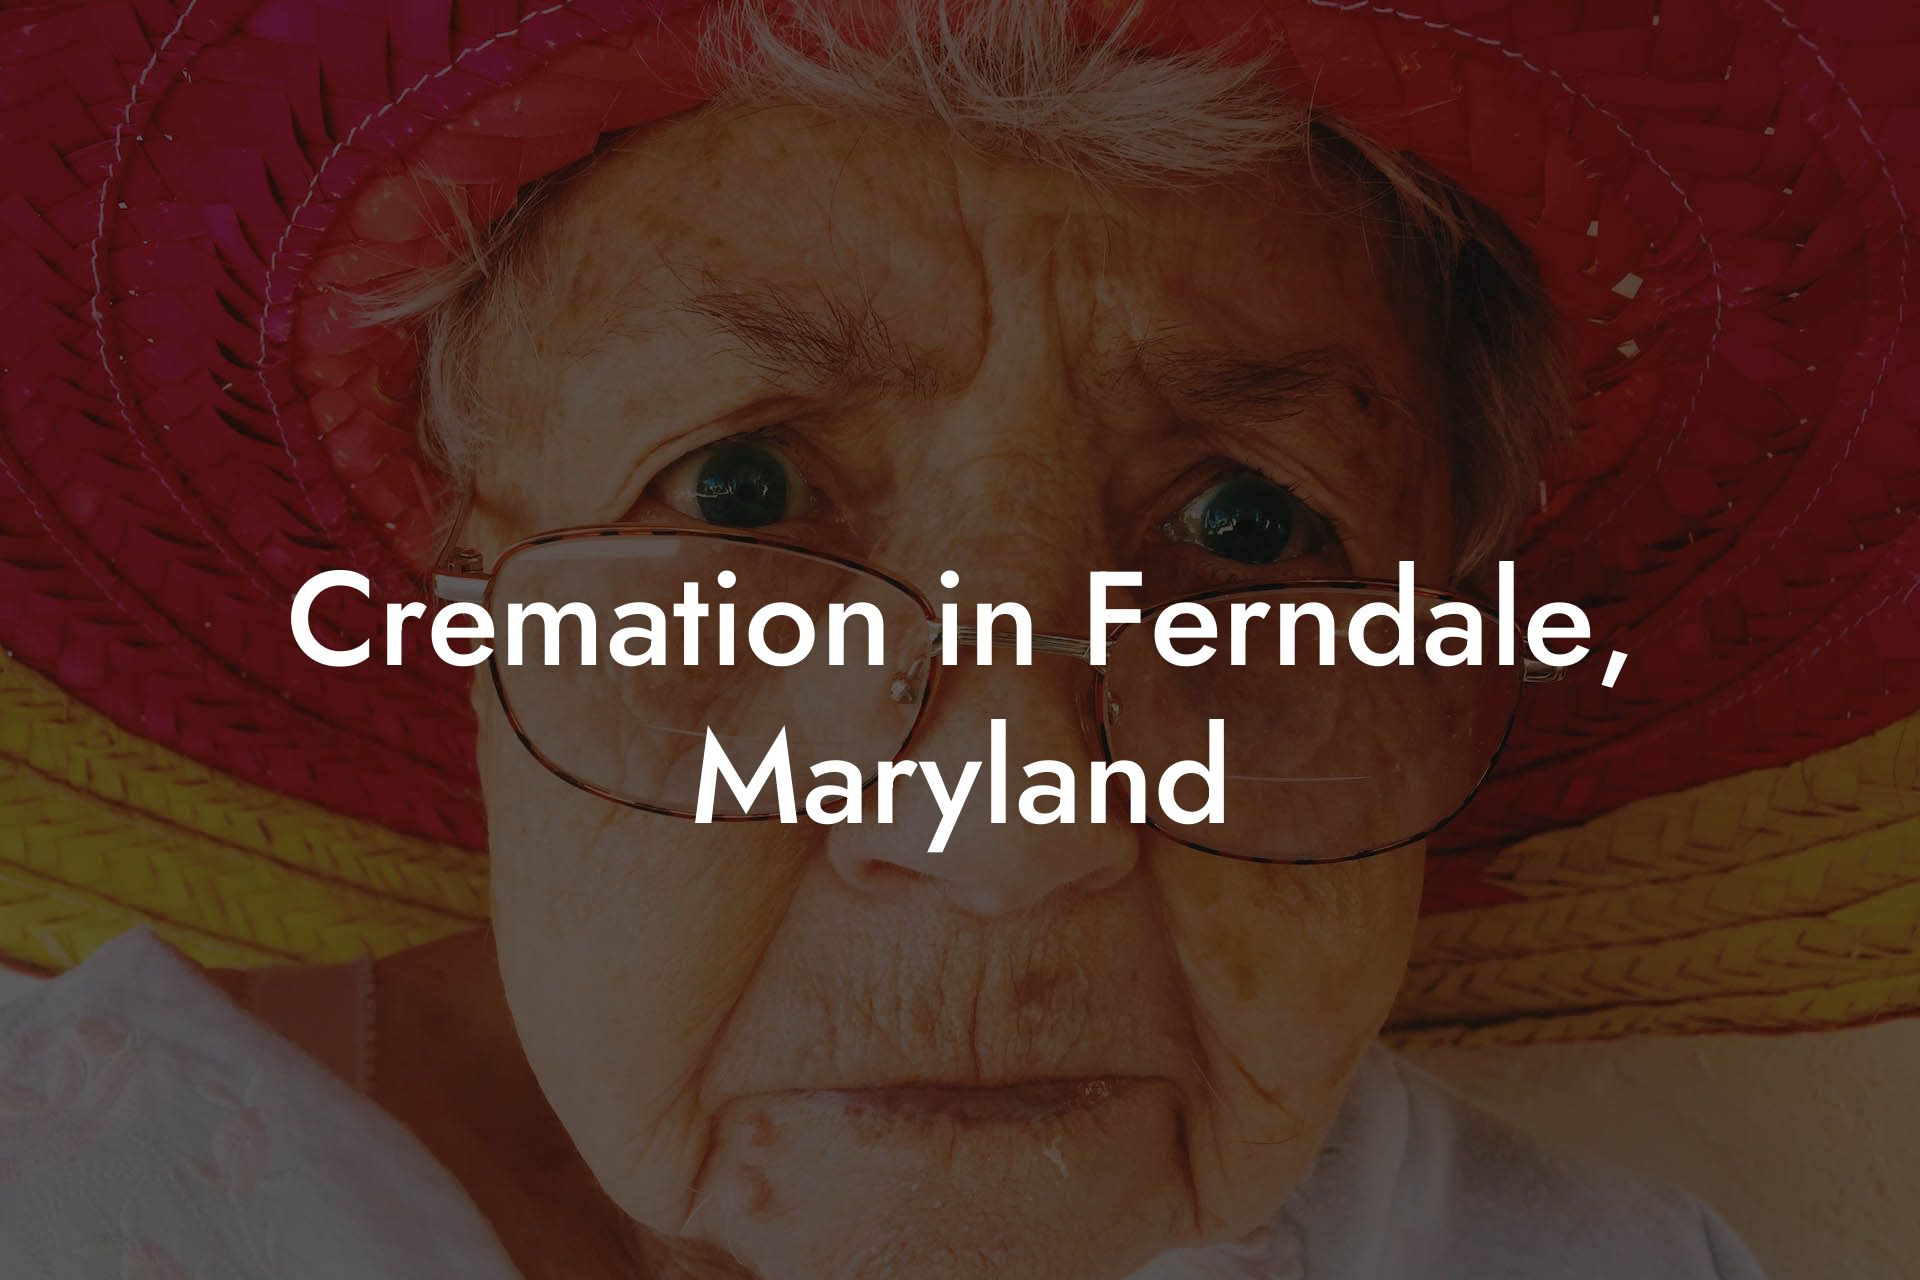 Cremation in Ferndale, Maryland